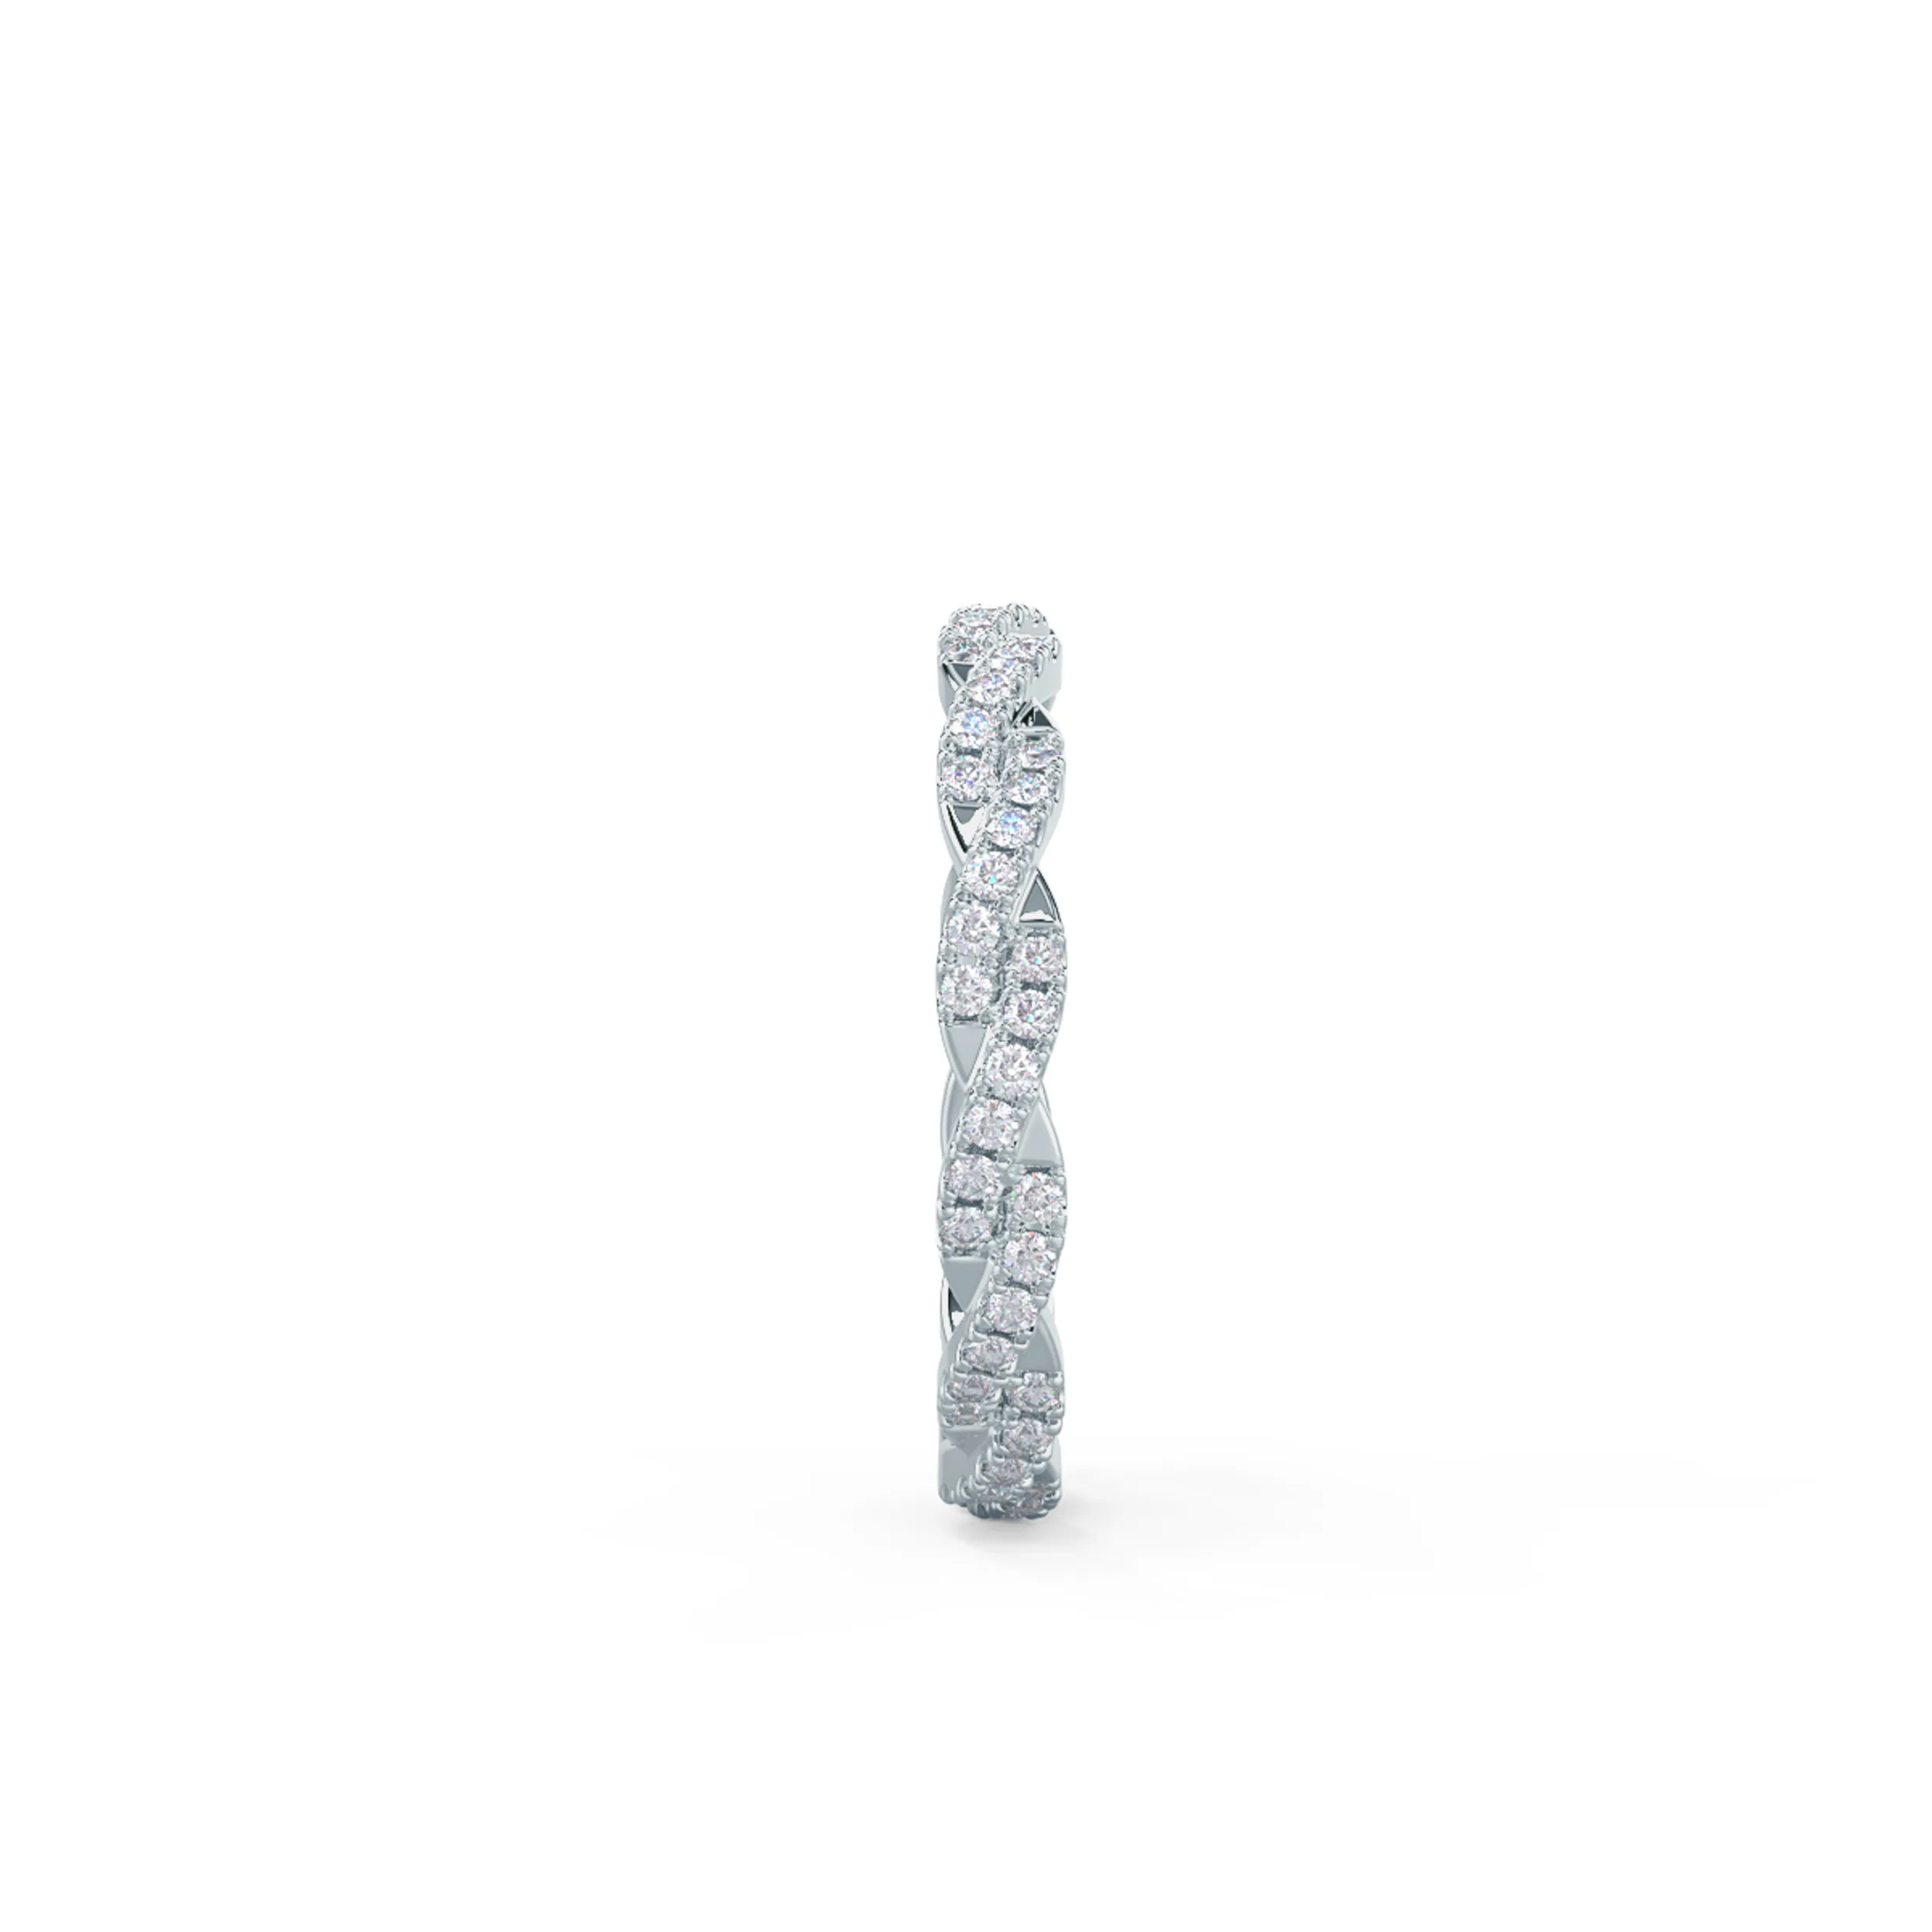 18k White Gold Diamond Infinity Twist Full Eternity Band featuring High Quality 0.45 Carat Round Diamonds (Side View)